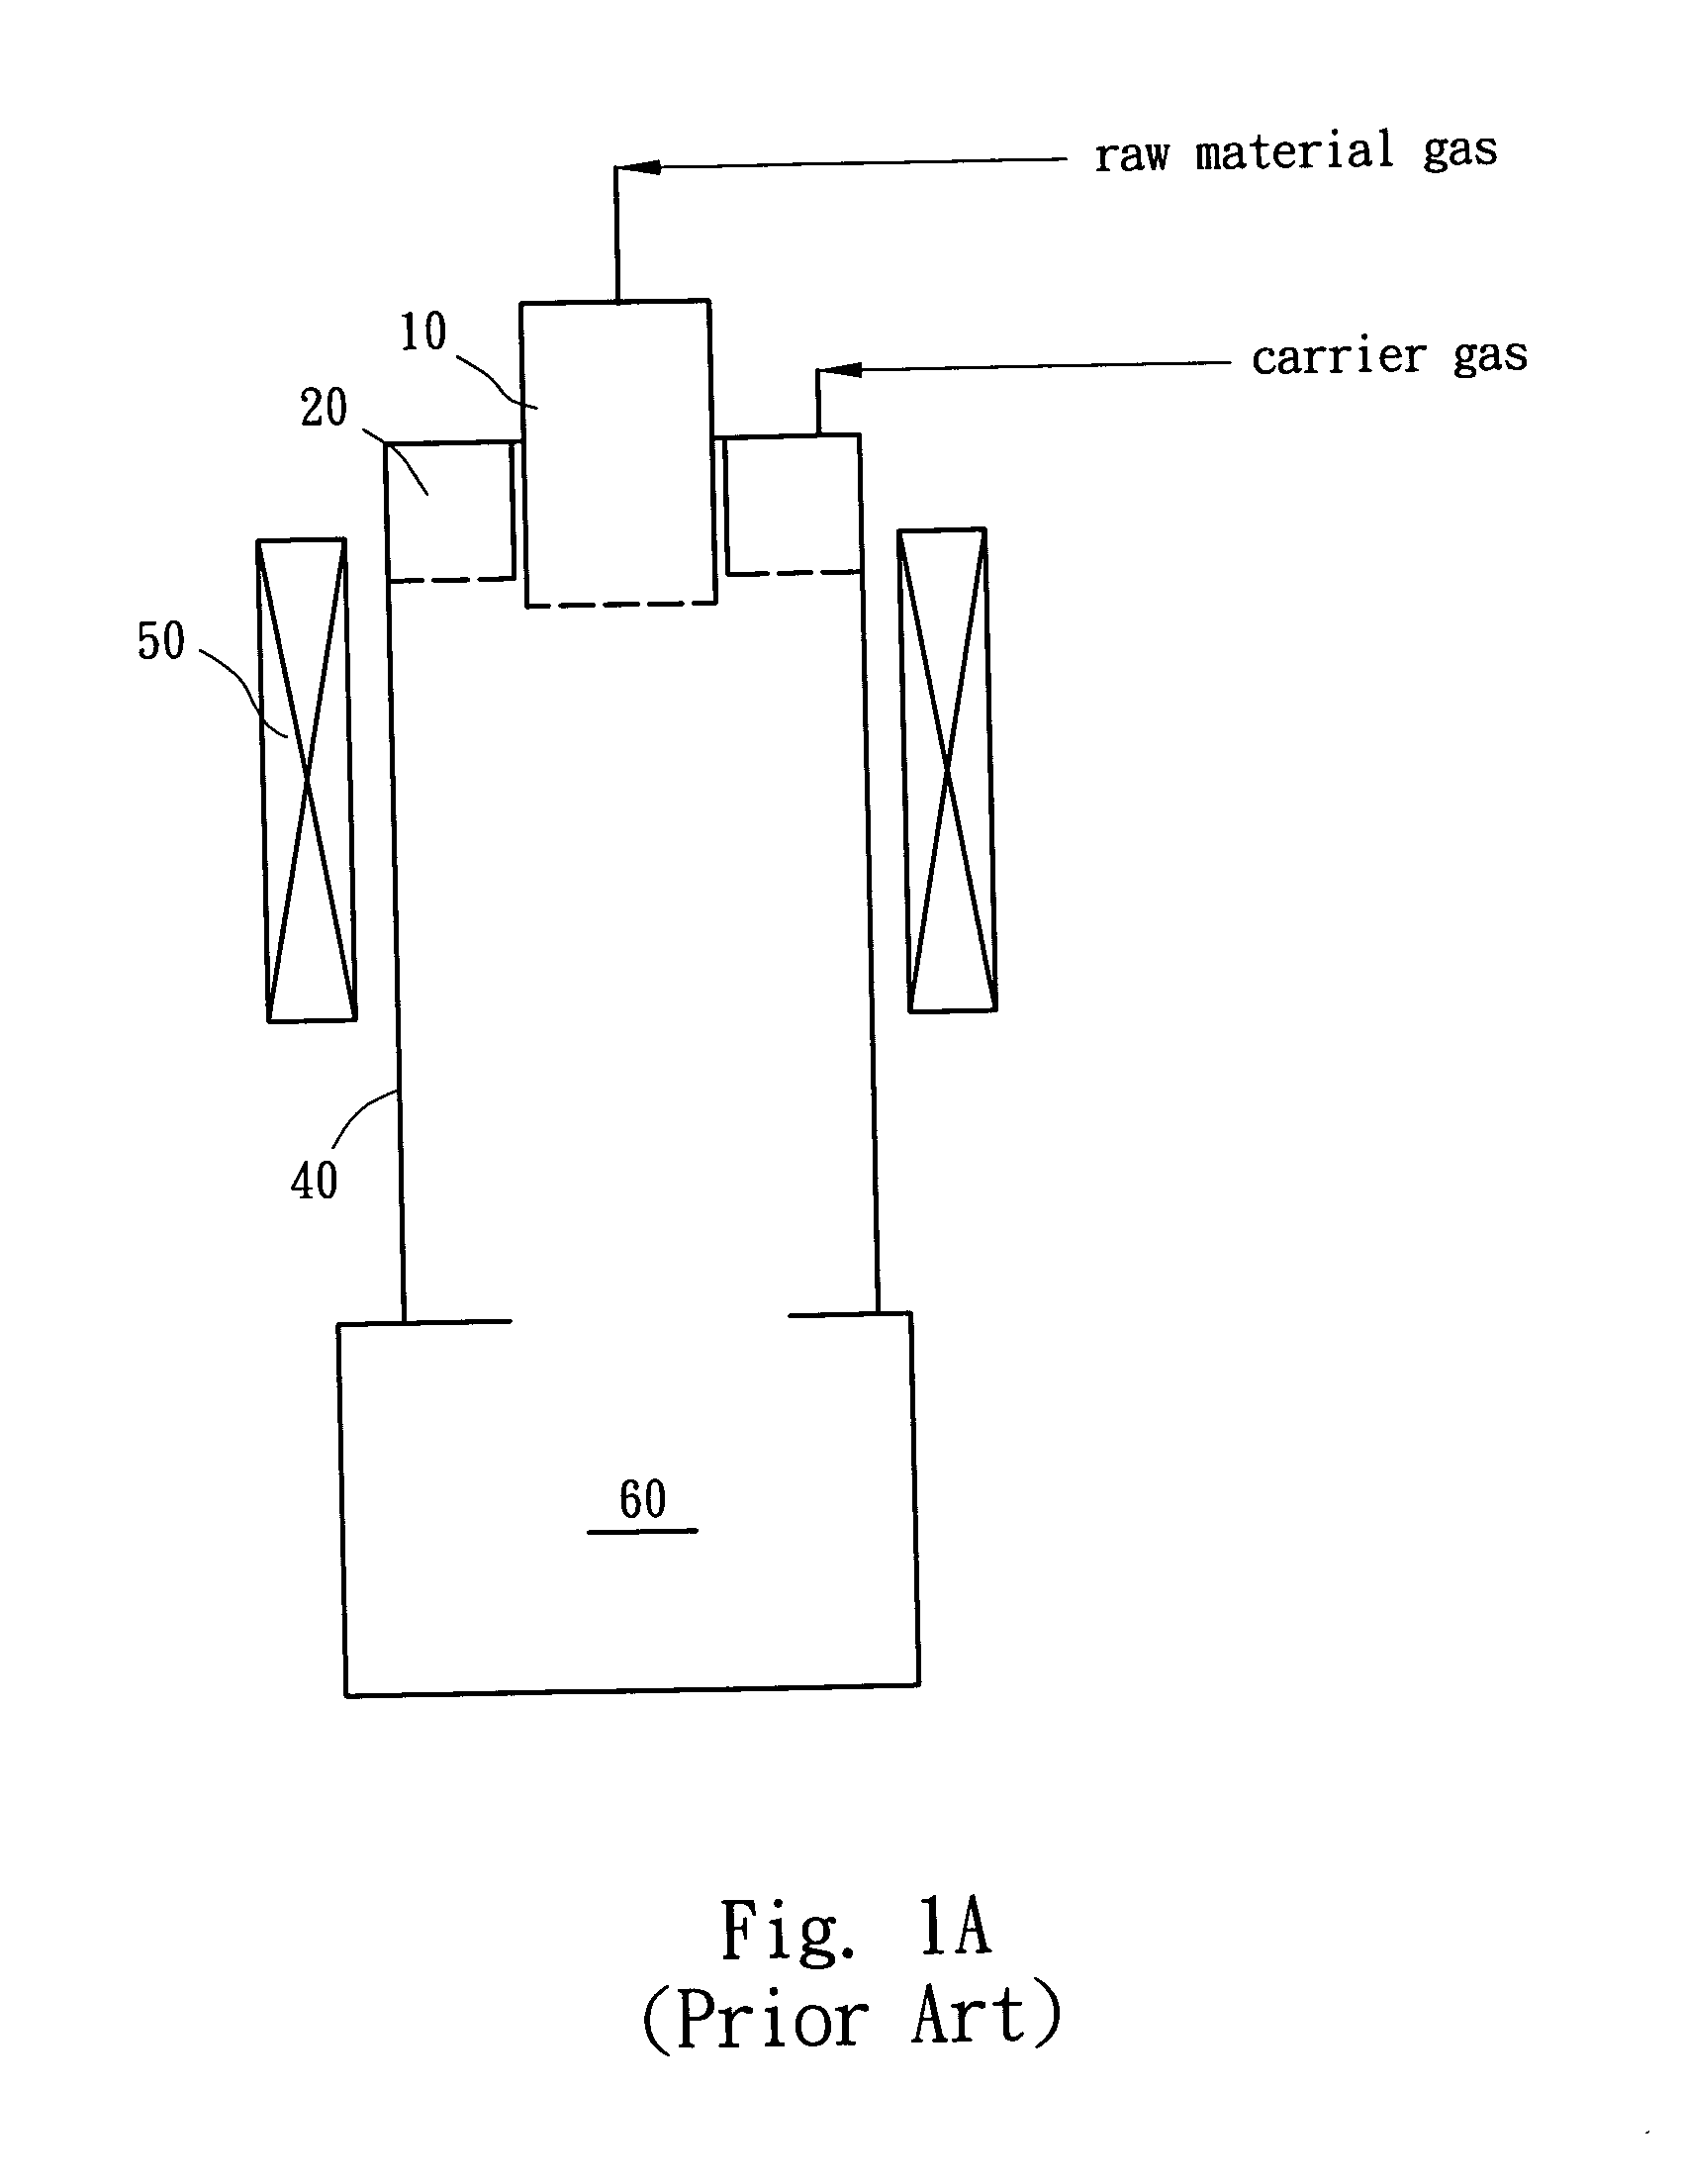 Reaction apparatus for producing vapor-grown carbon fibers and continuous production system therefor